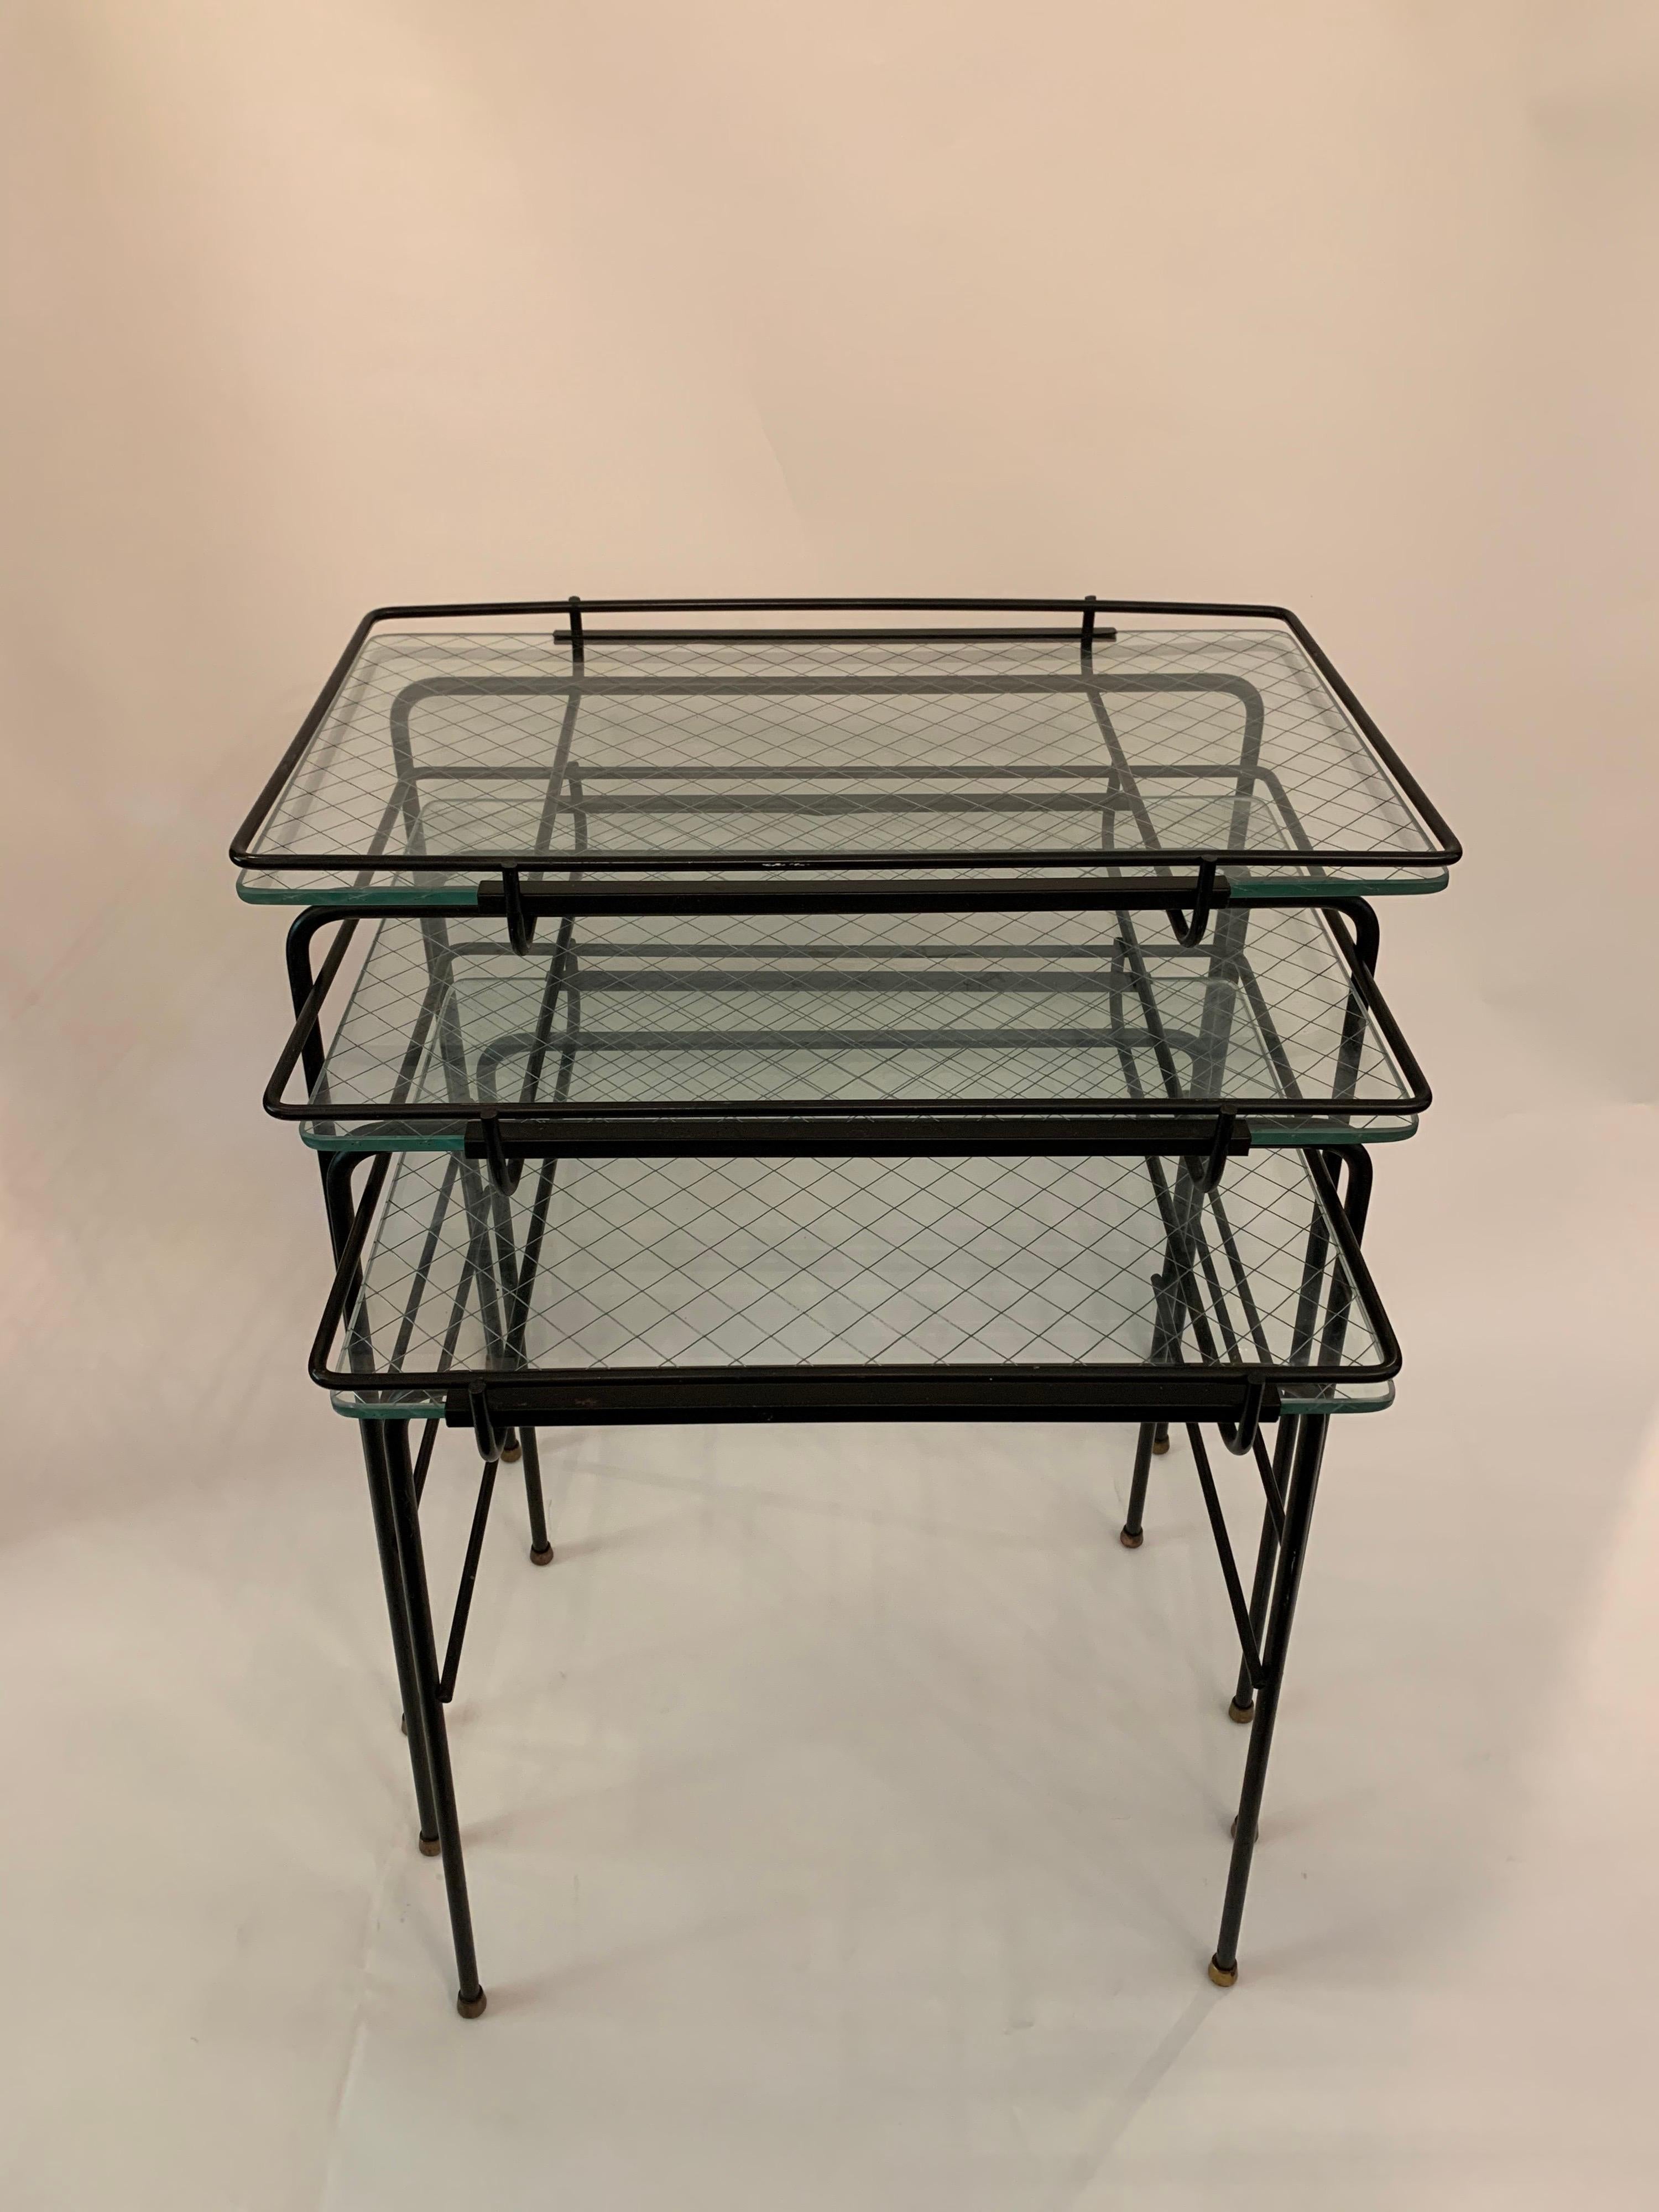 These are a set of 3 vintage French nesting tables very much in the manner of Mathieu Matégot. The black metal frames, brass ball feet and lattice glass table tops.

Measures: Small 18.5 H x 15.75 W x 11.75 D
Medium 20.5 H x 17.75 W x 11.75